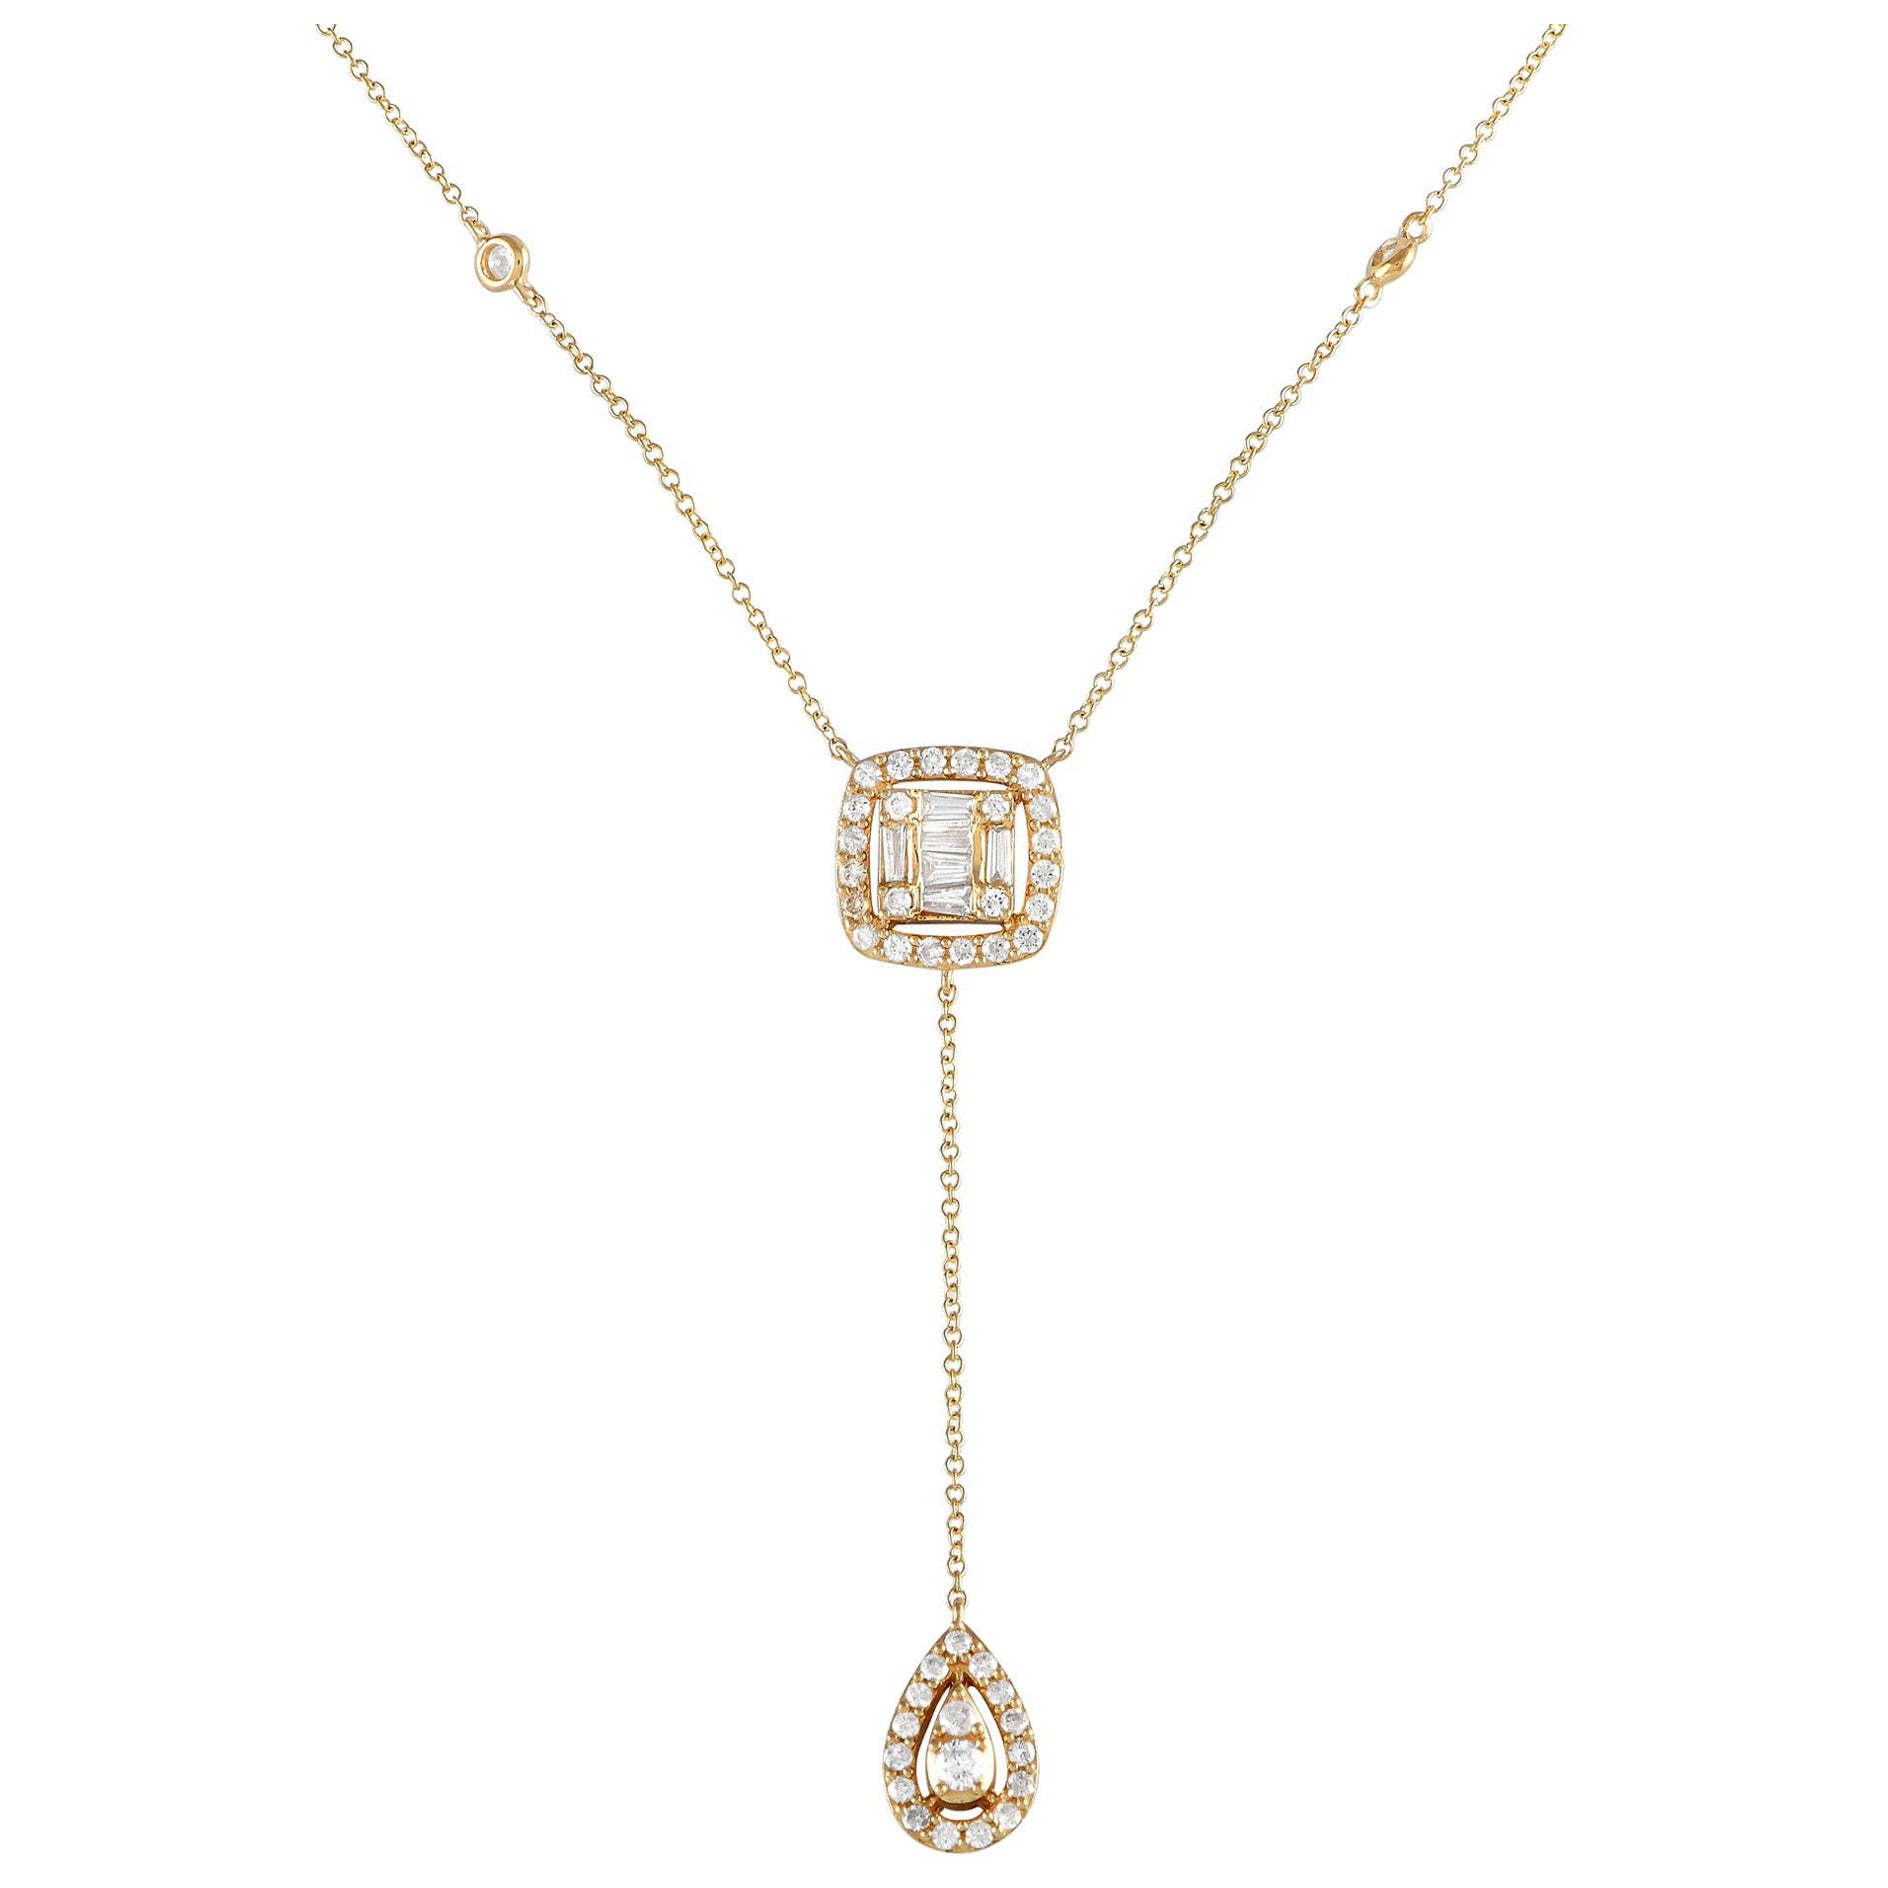 LB Exclusive 14K Yellow Gold 0.65ct Diamond Necklace NK01381